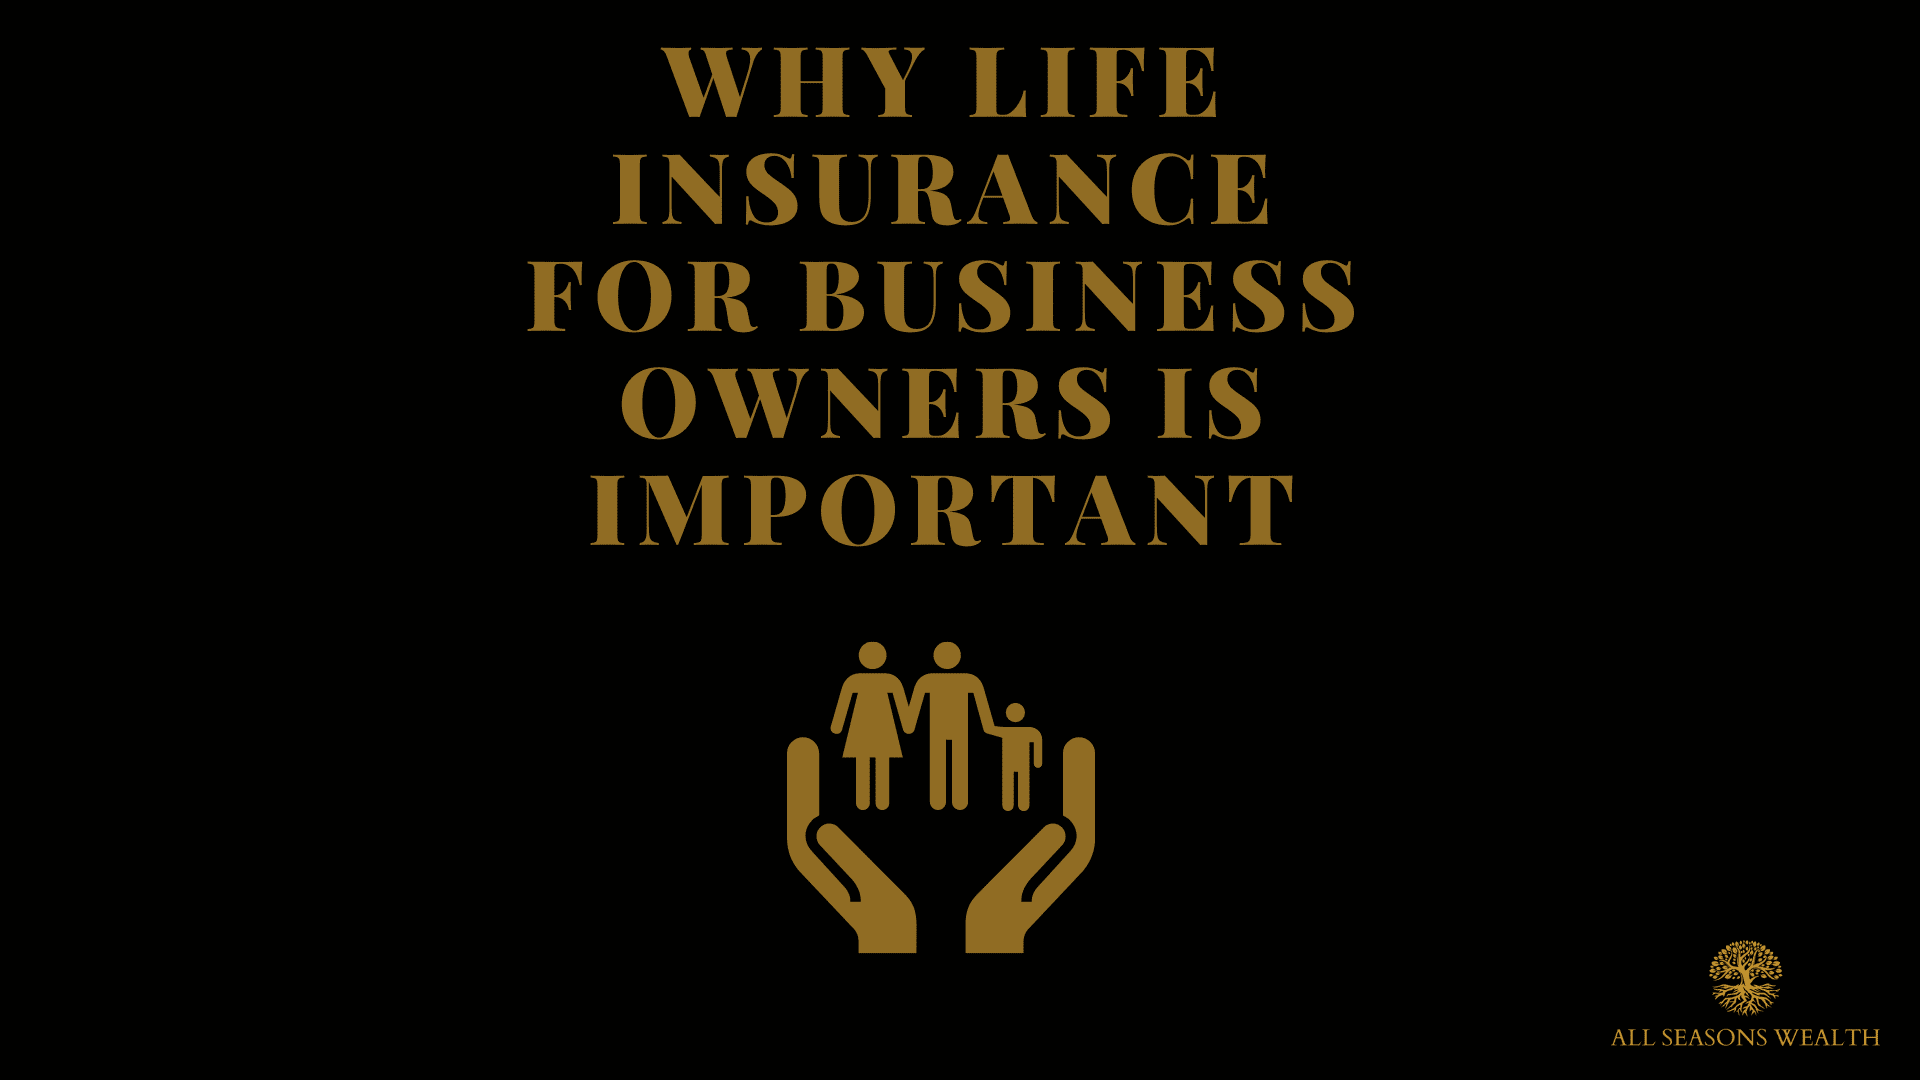 Why Life insurance for Business Owners is Important